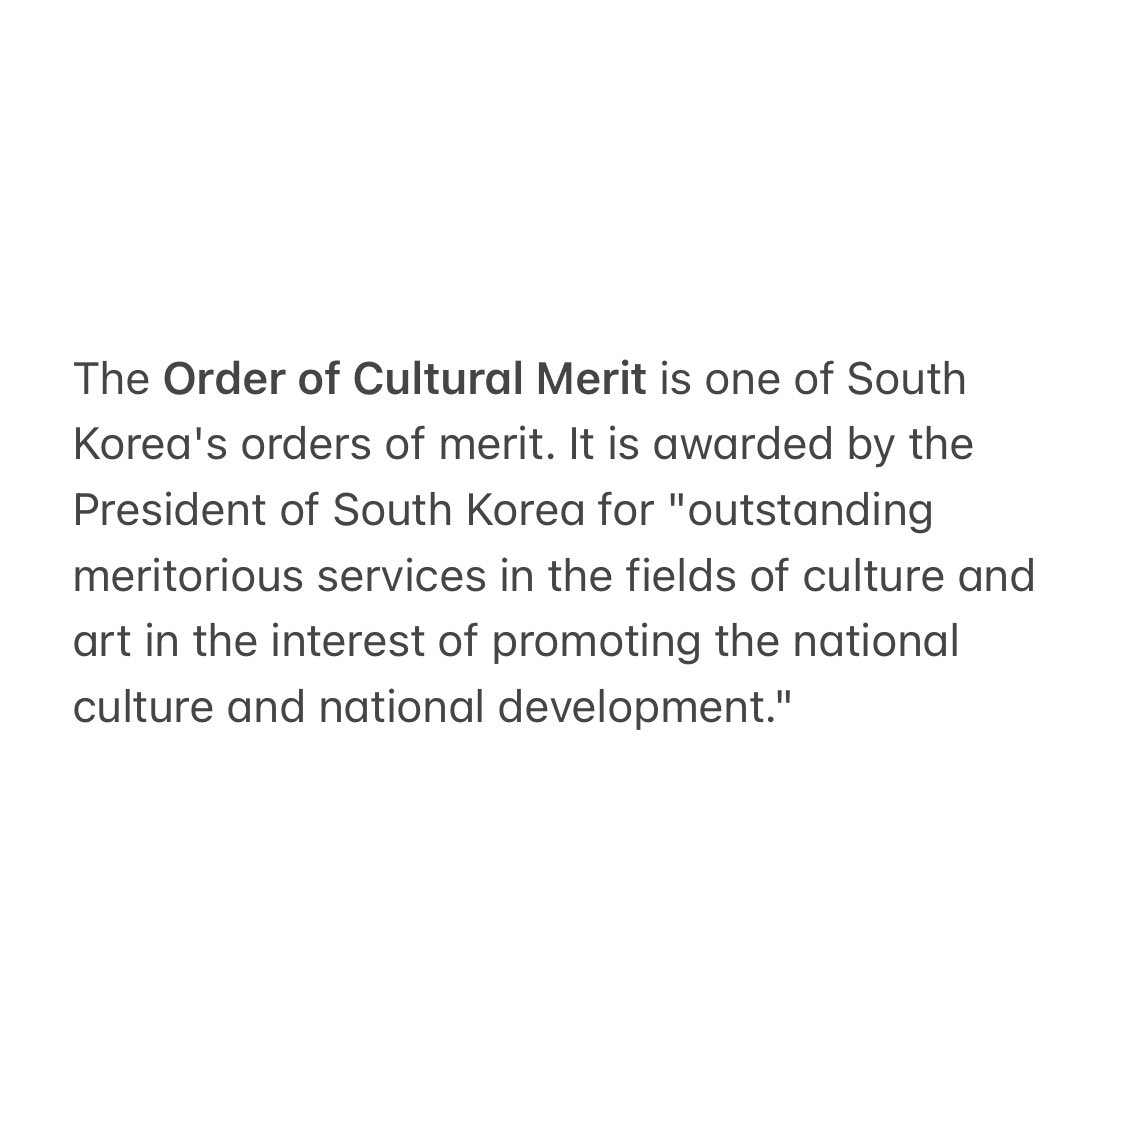 only 5 years into their carrer (2018), BTS became the first, only and youngest kpop group to receive the order of cultural merit.